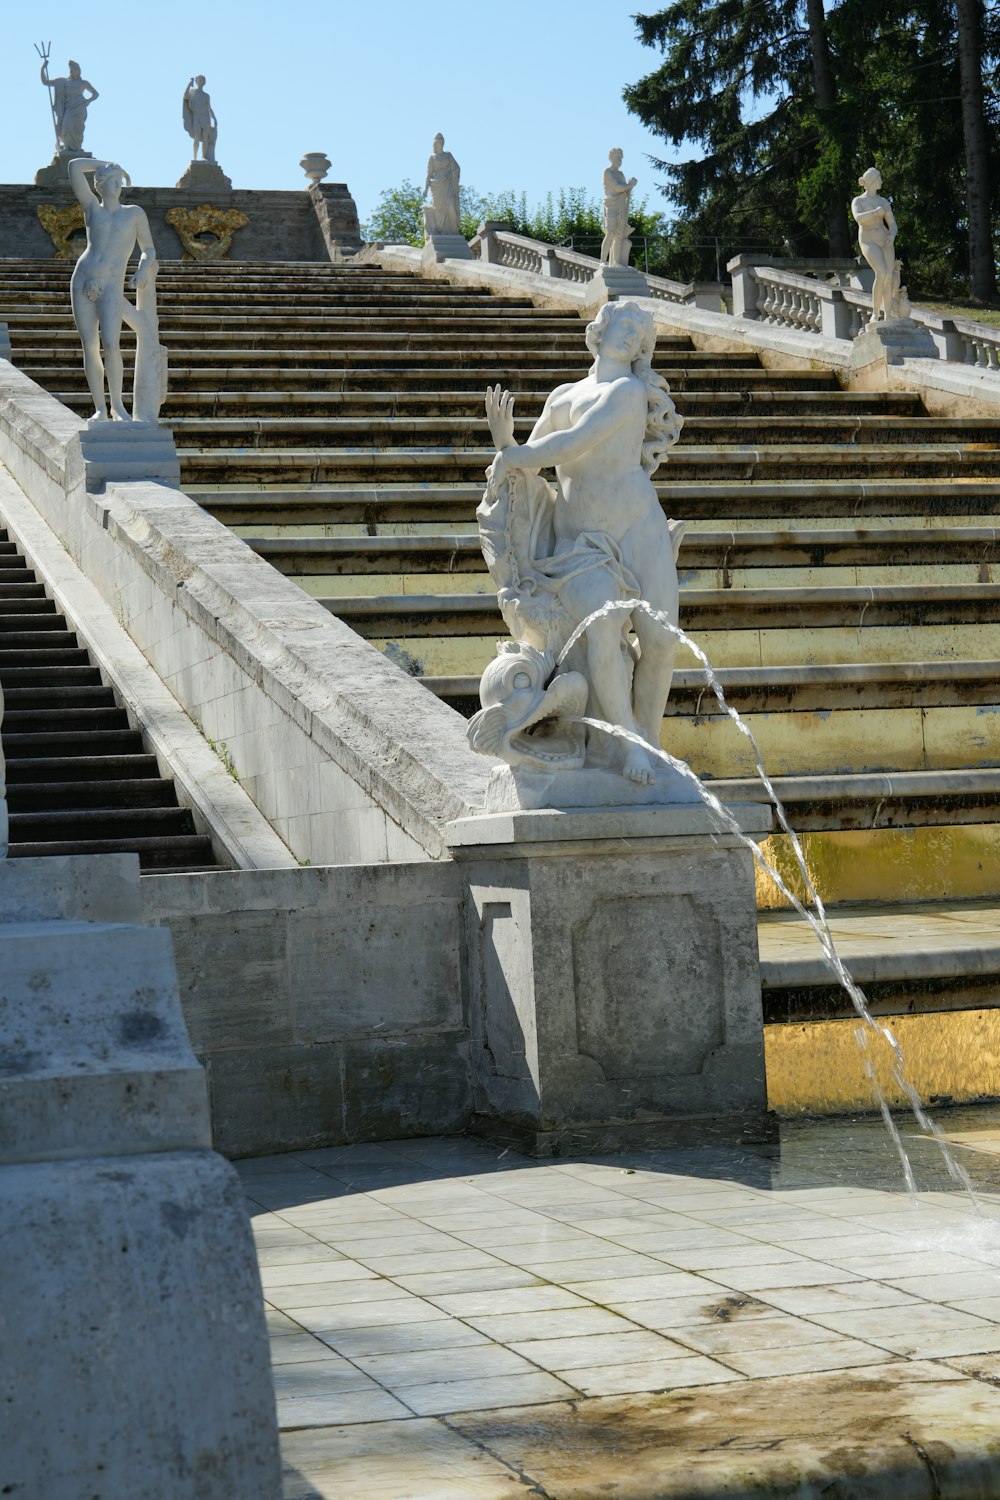 a fountain in front of a set of stone steps